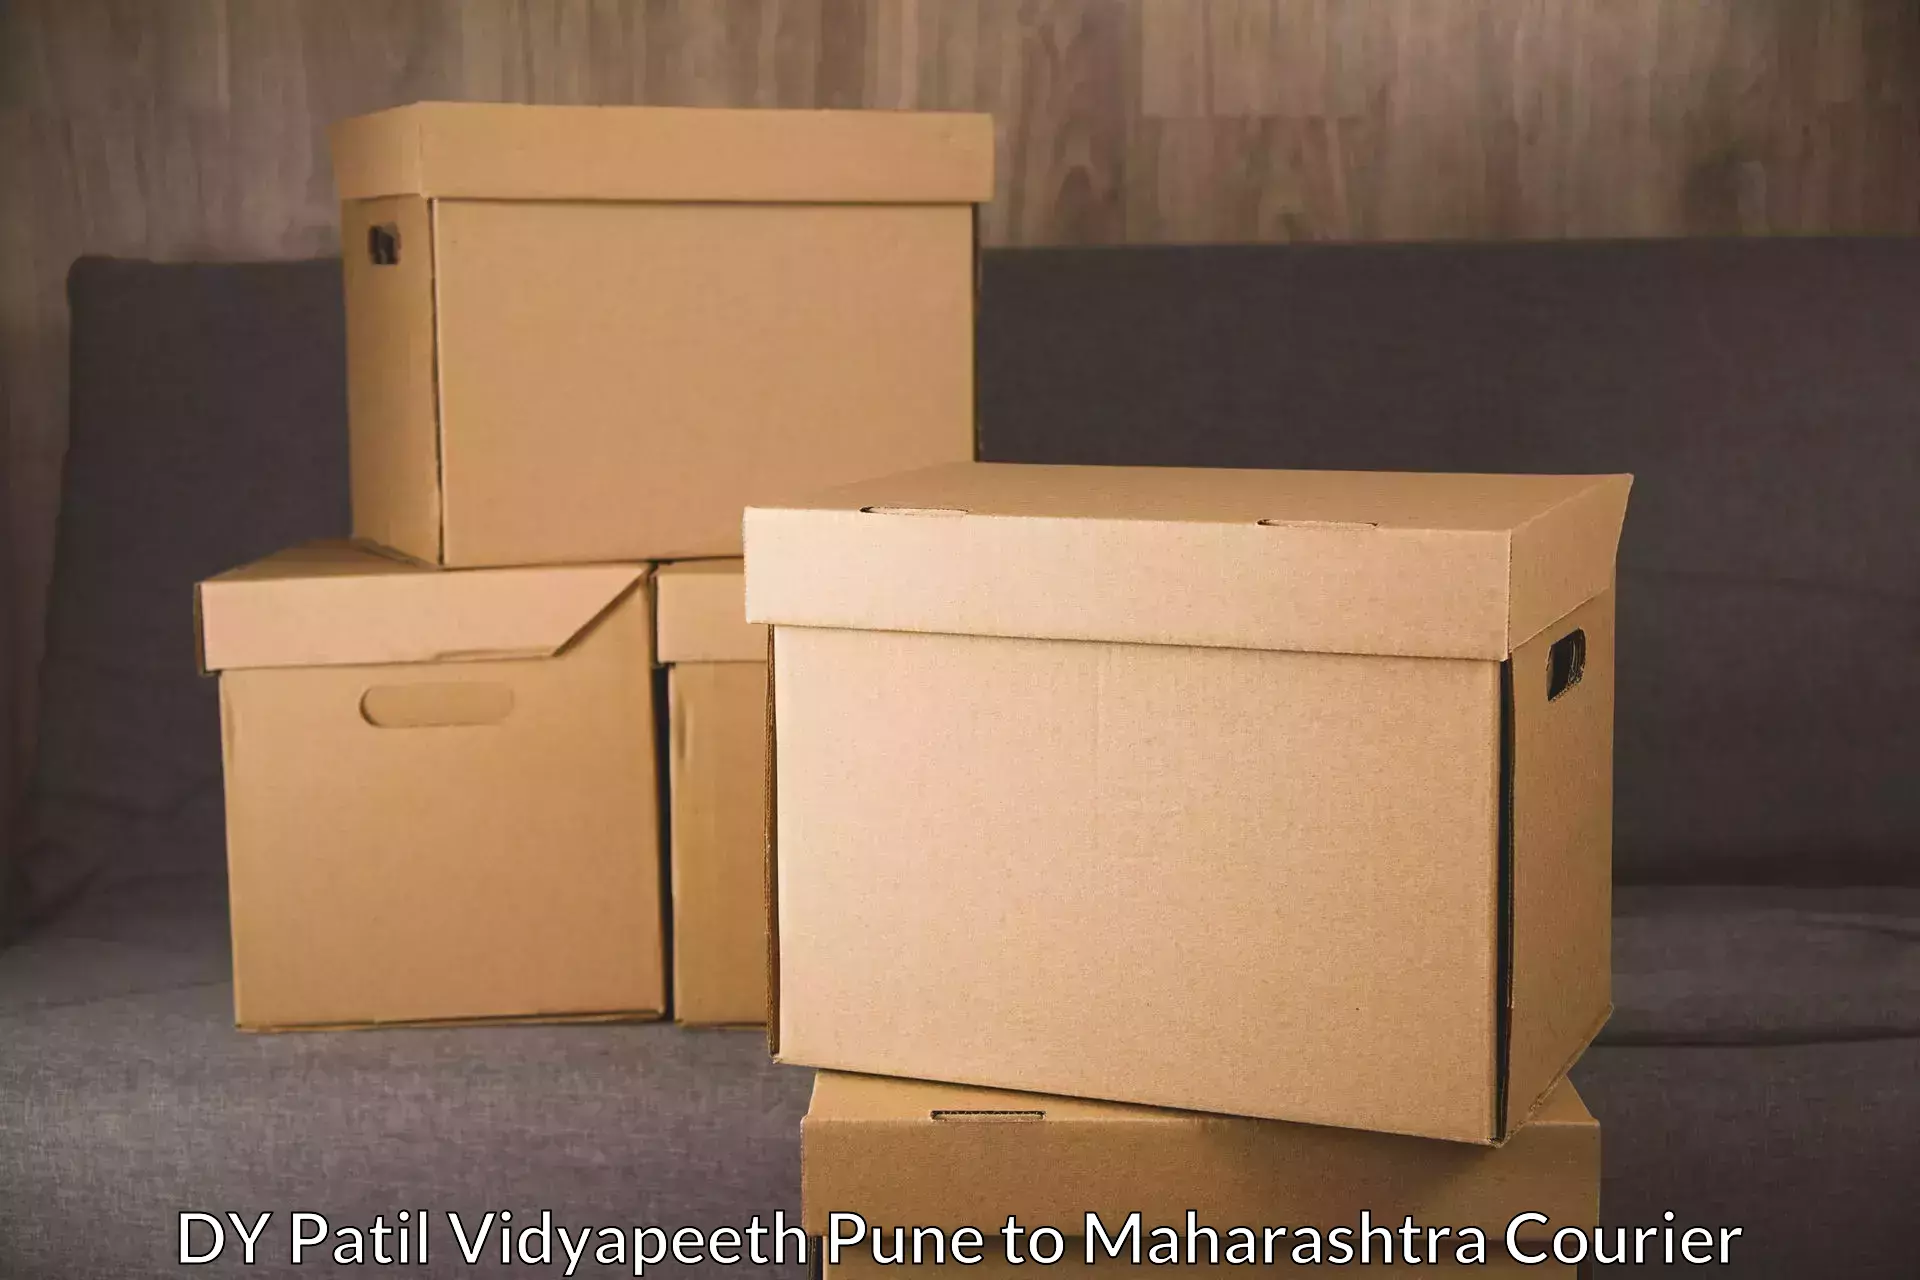 Corporate courier solutions DY Patil Vidyapeeth Pune to Shindkheda